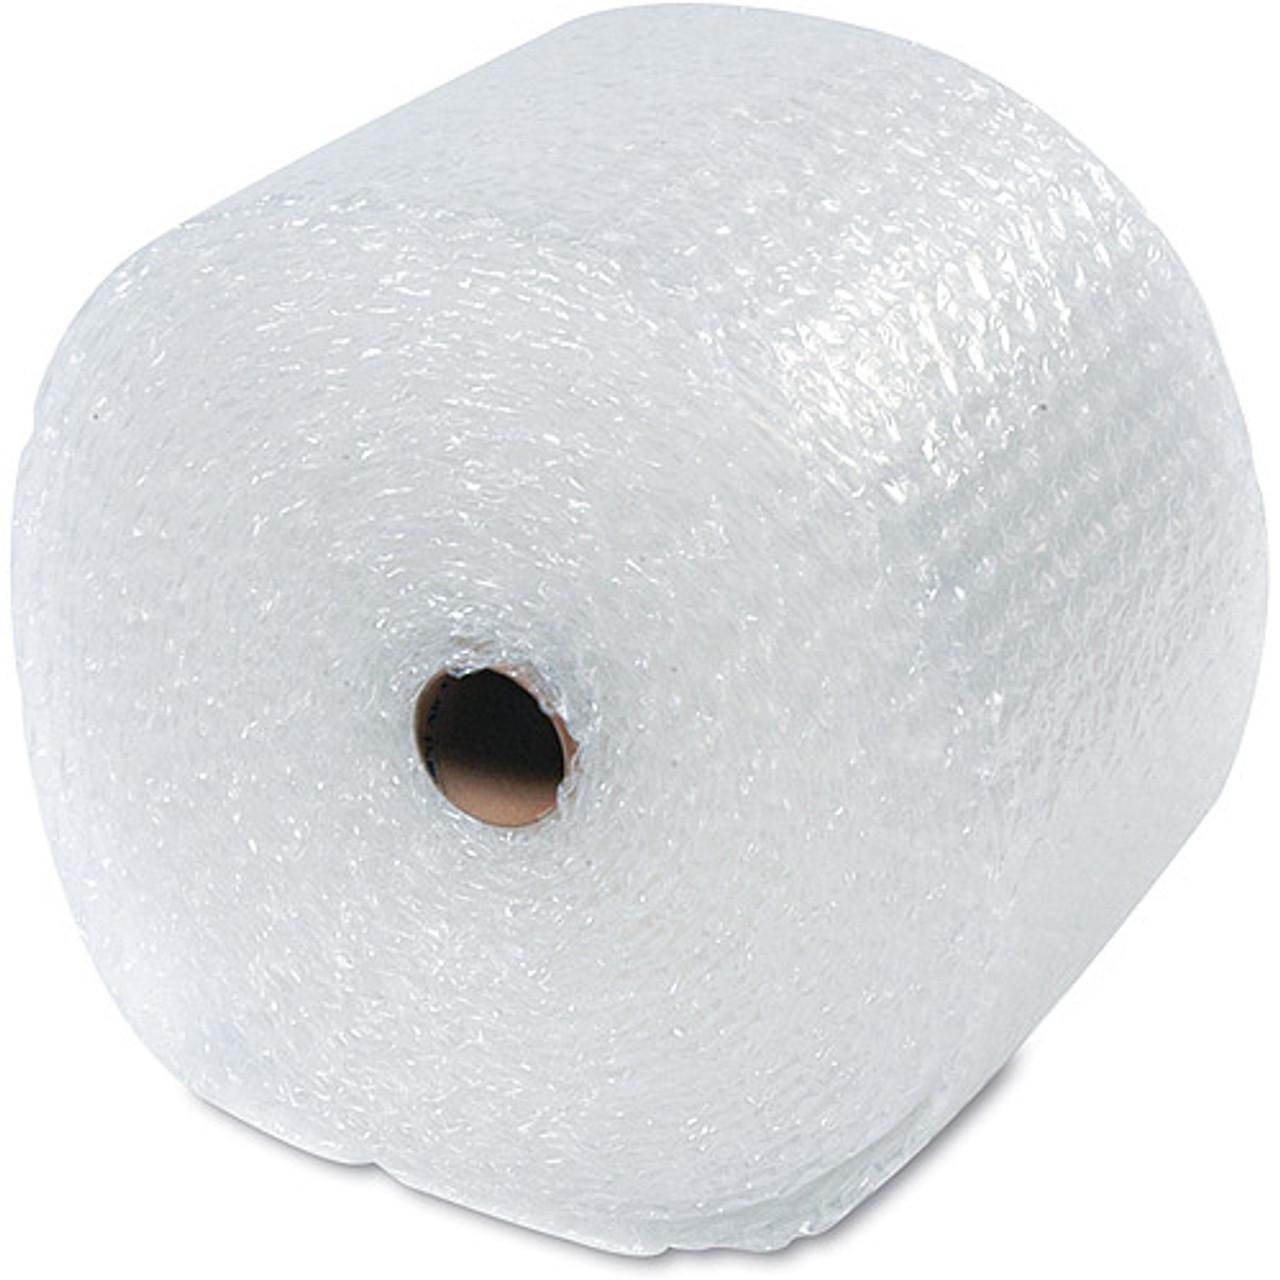 BUBBLE WRAP® 125 ft x 24- Large Bubble 1/2- perforated every 12